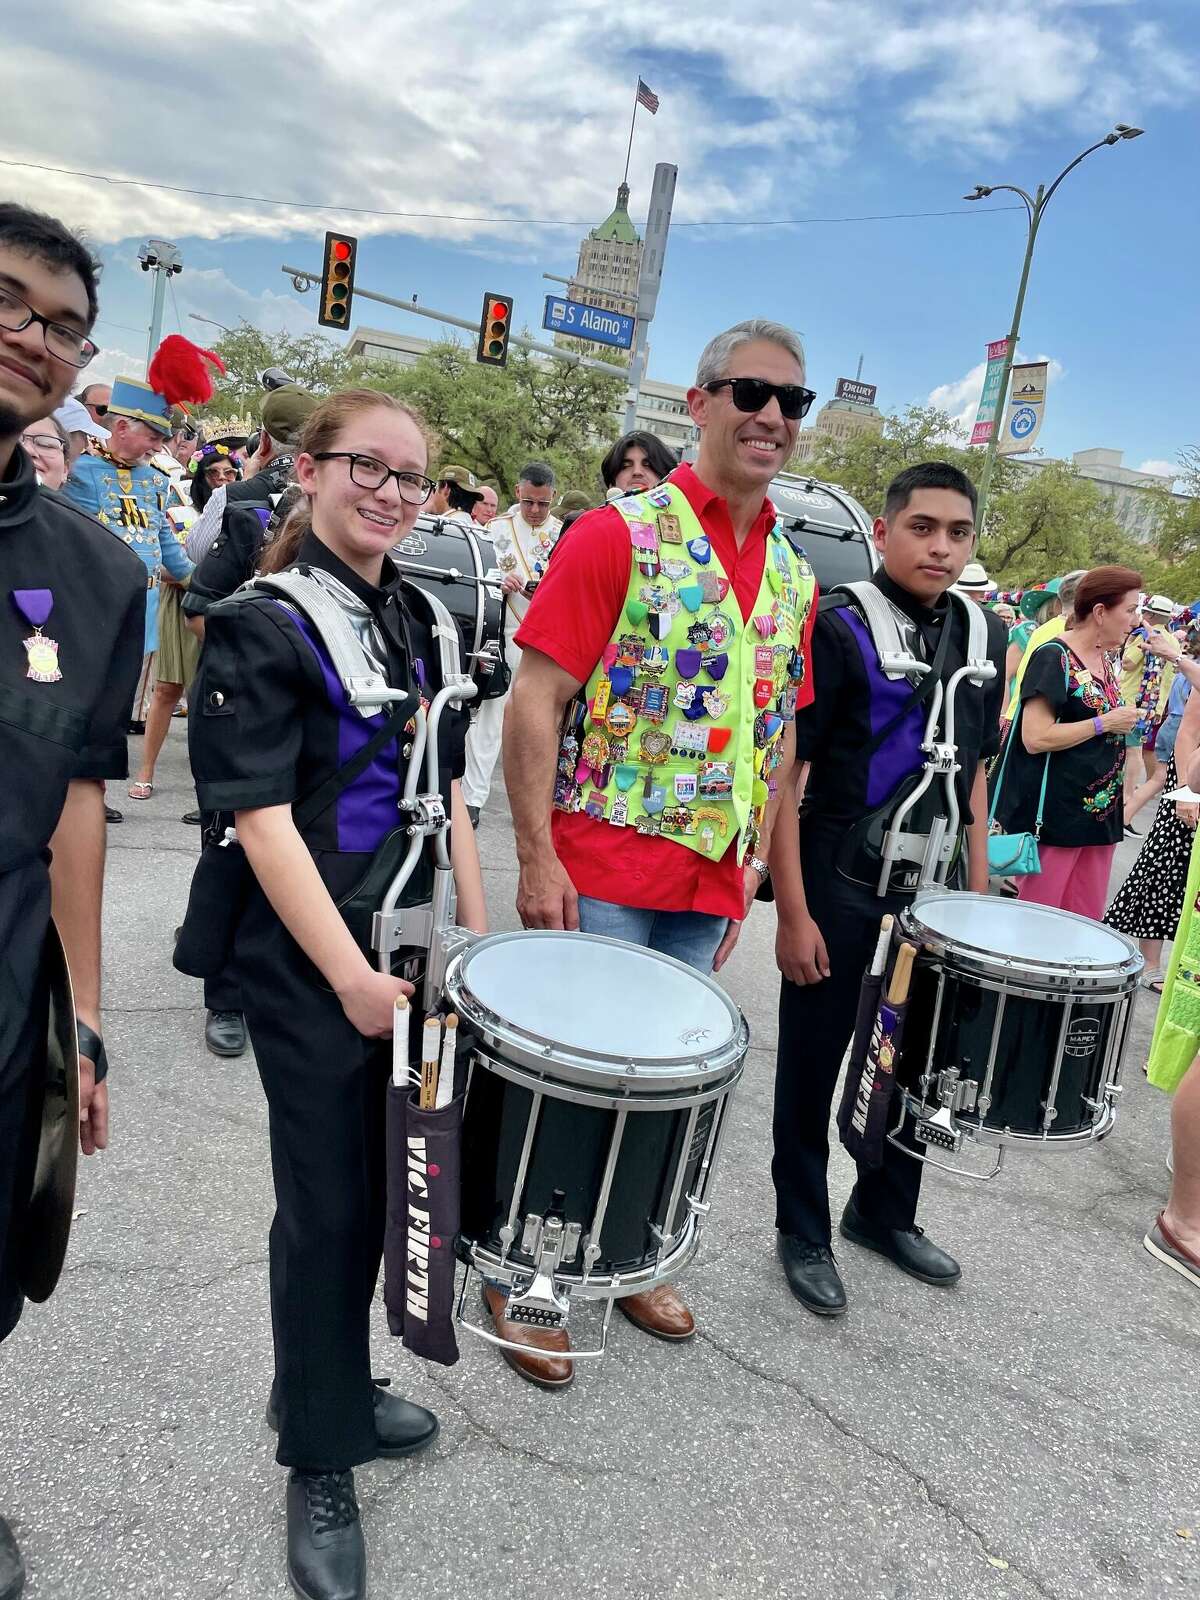 Kimberly Siller is returning to the Fiesta parades as a senior and Brackenridge High School's drum line captain. The last year the parades took place, Siller was a freshman. 